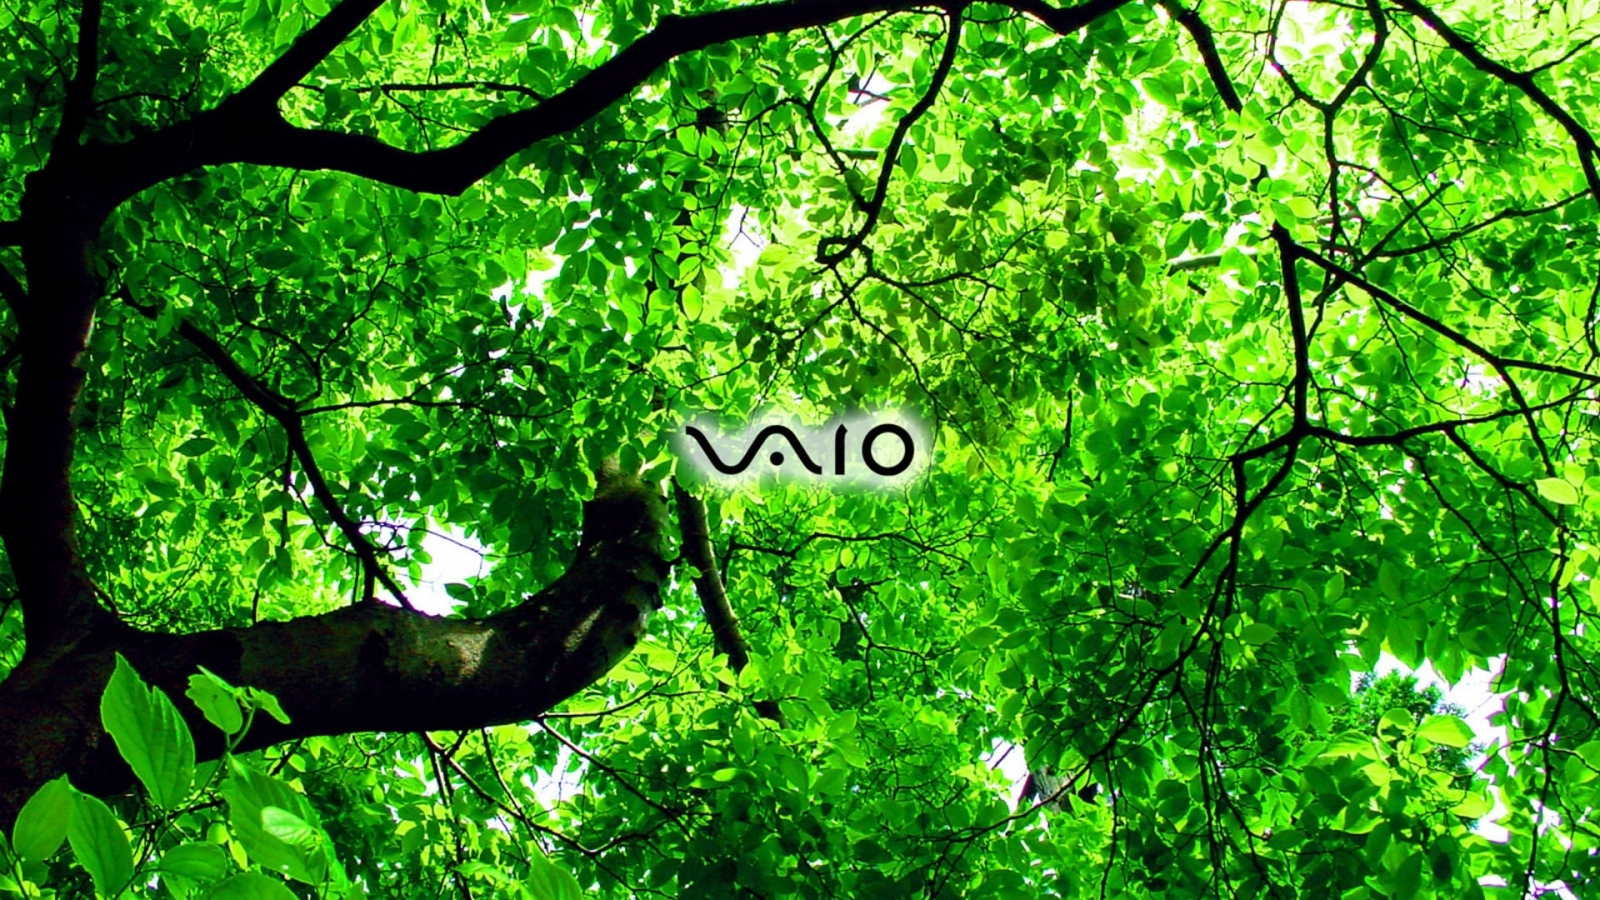 Sony Vaio green for 1600 x 900 HDTV resolution